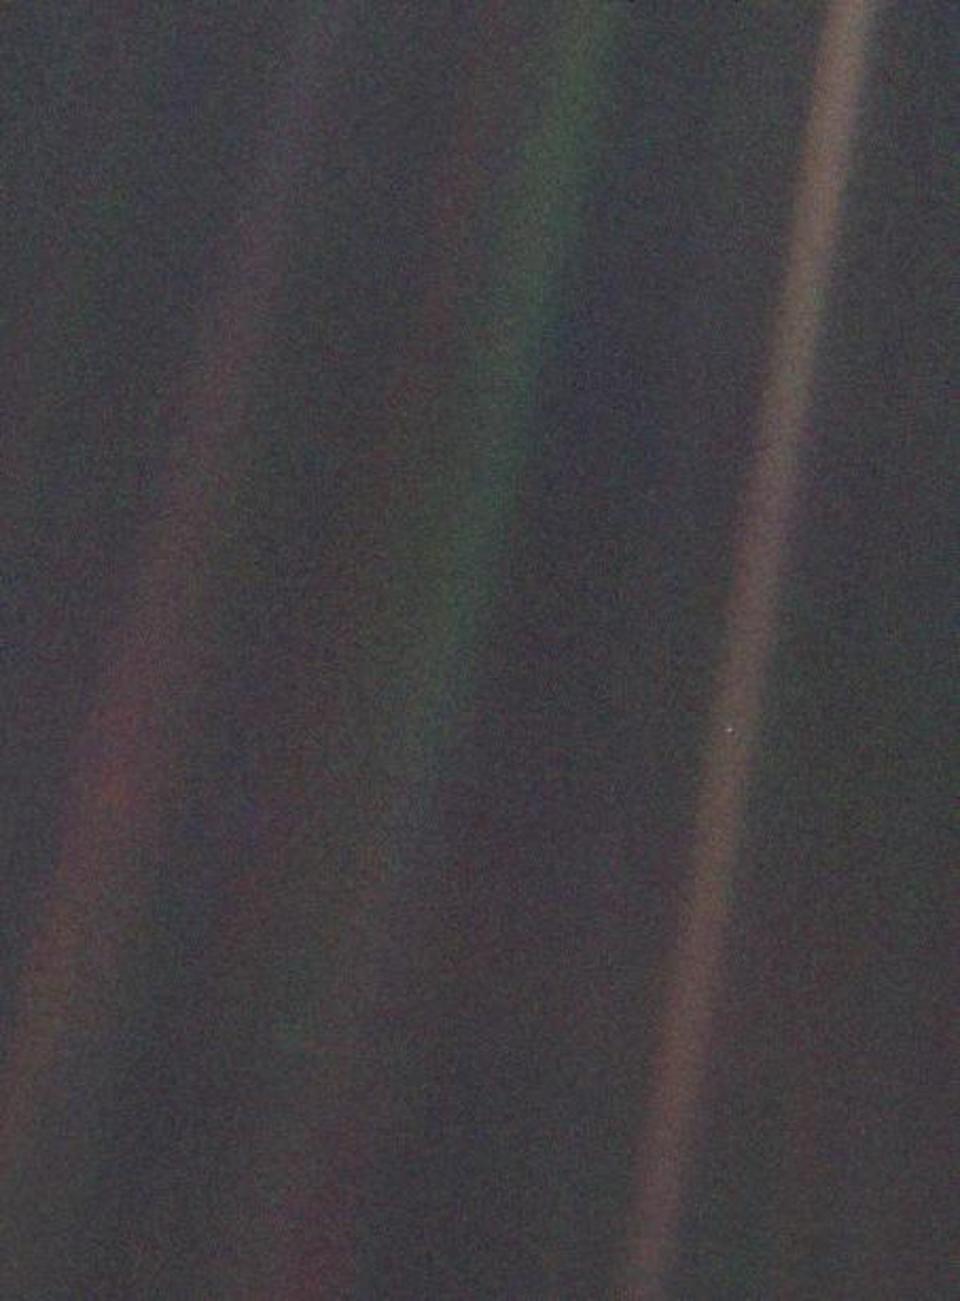 Earth is seen as a mote in an orange shaft of sunlight in this image taken by the Voyager 1 spacecraft in 1990 from a vantage point 40 times further from the Sun that the Earth. (Nasa)